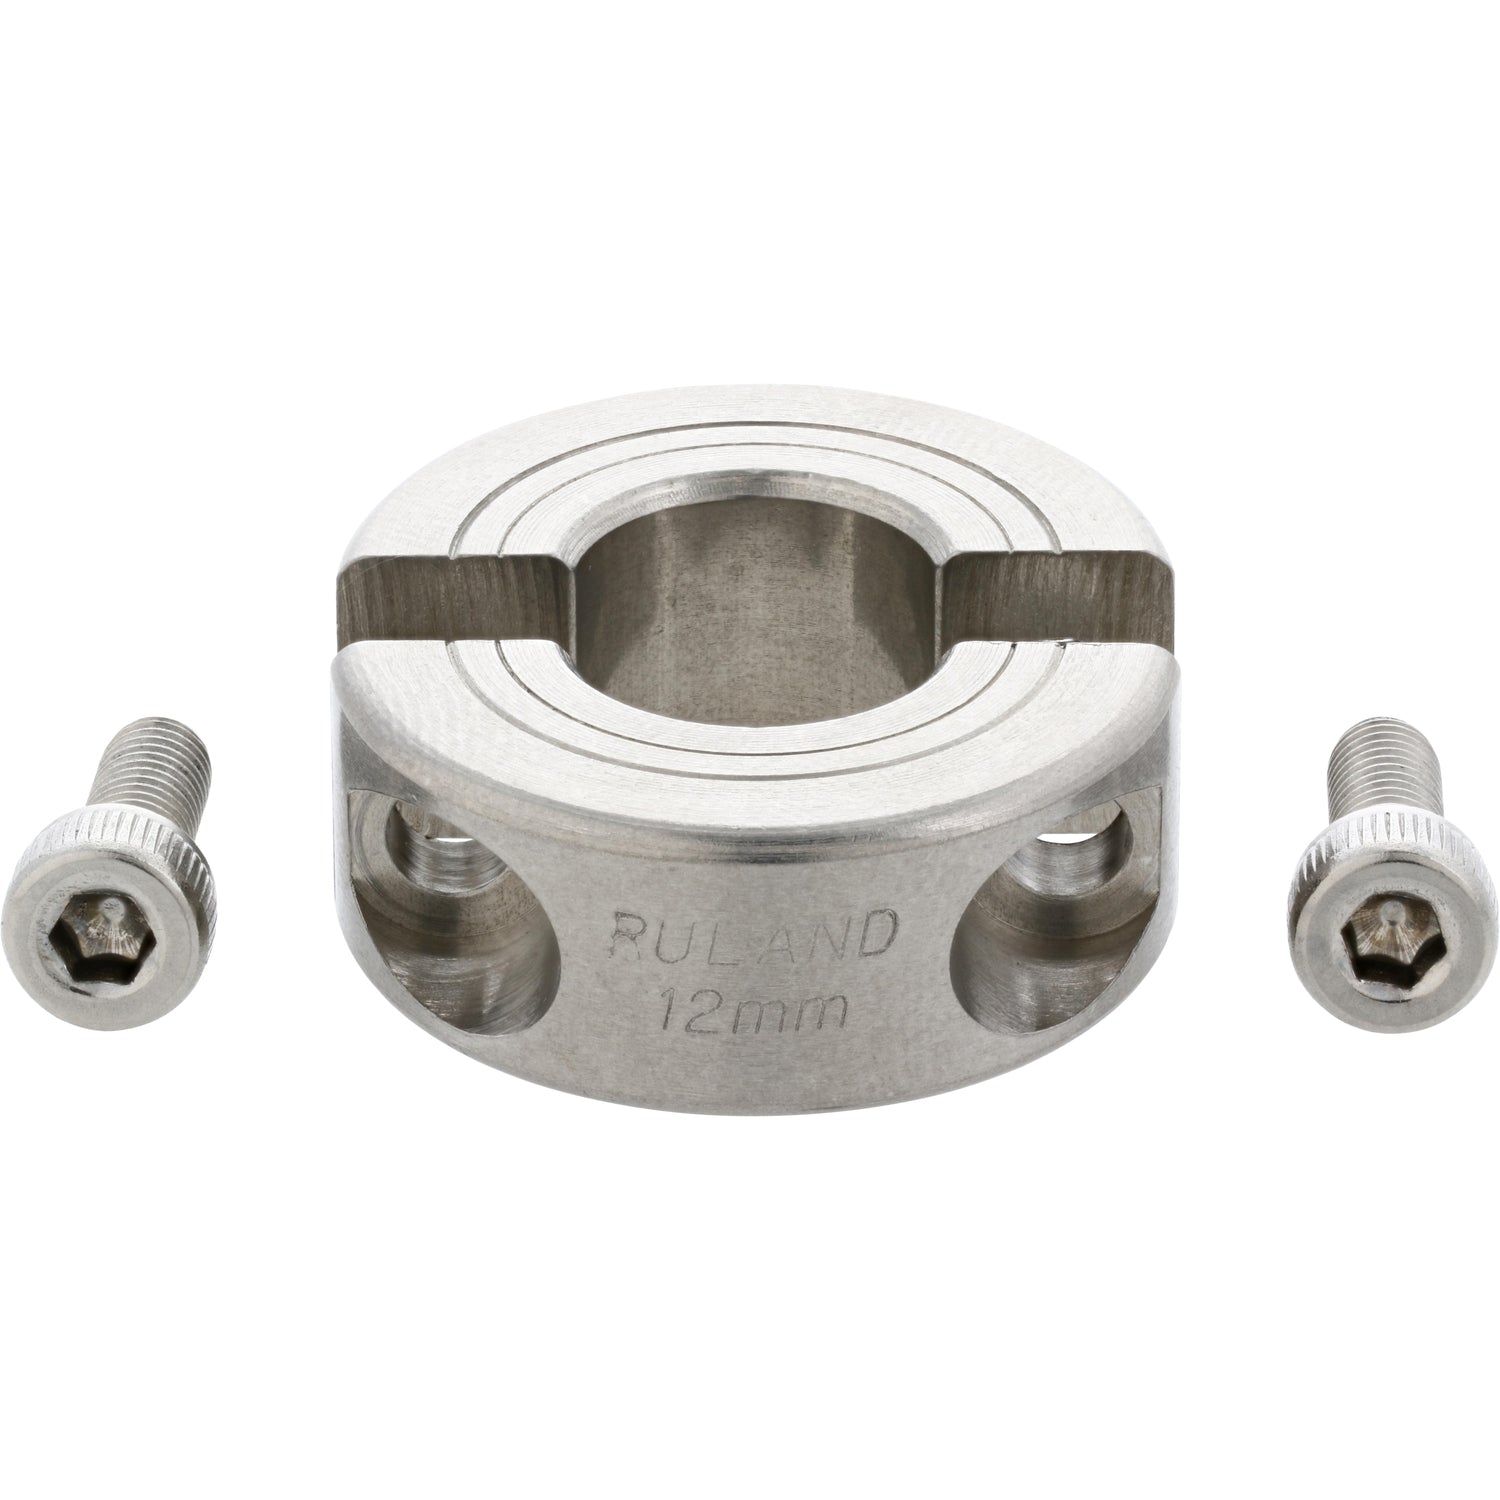 Two halves of a circular stainless steel clamp with two socket head cap screws placed at its side shown on a white background. 